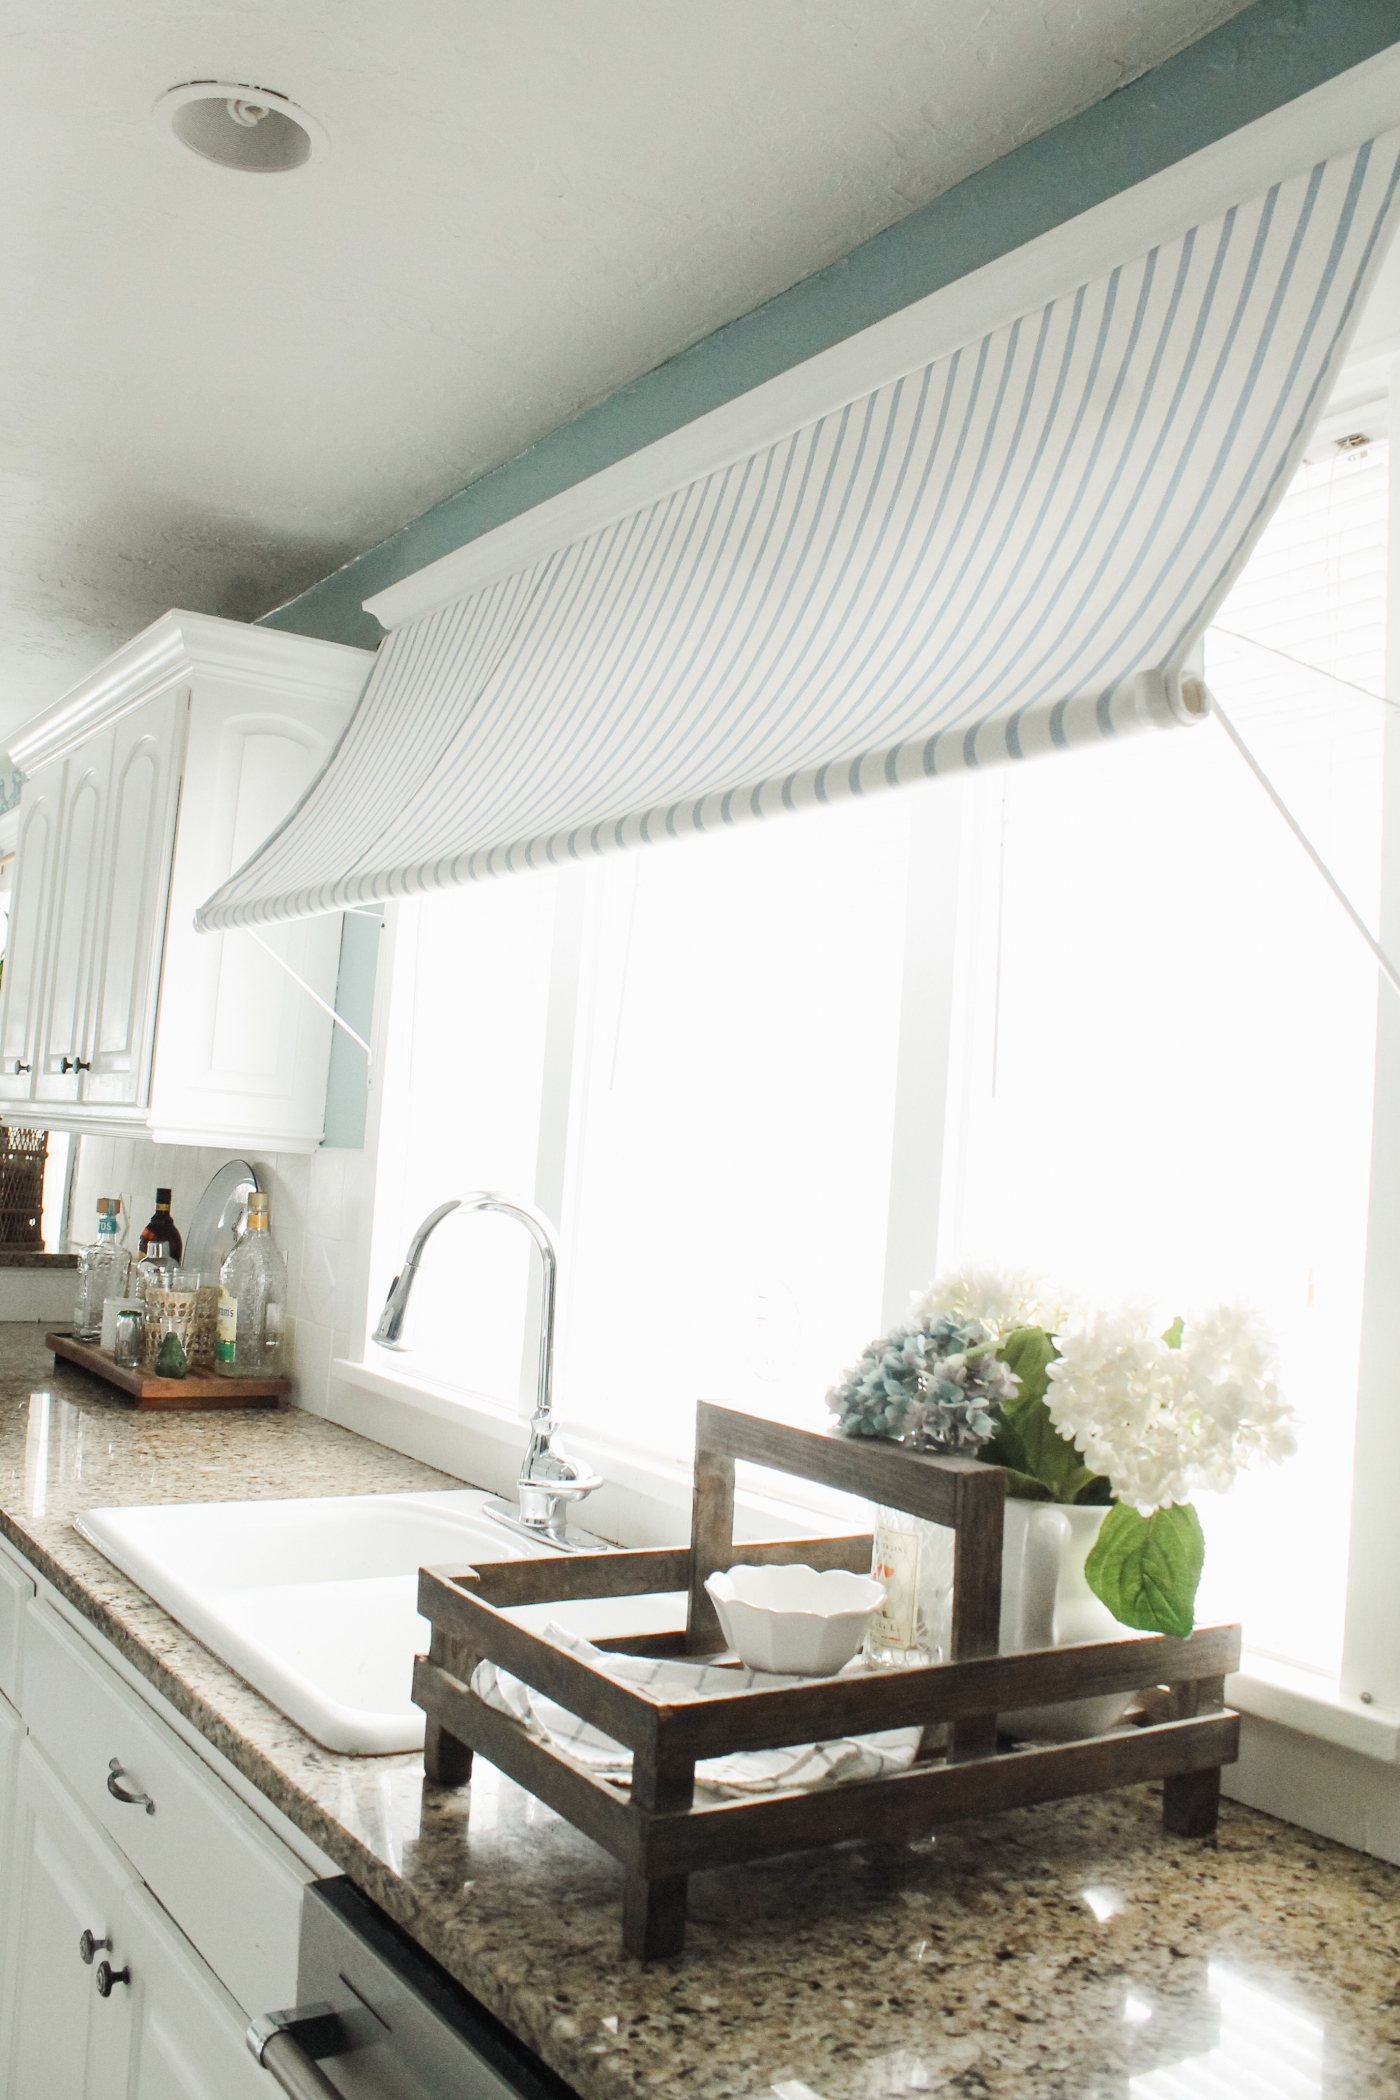 How to make a Window Awning – A fun alternative to a Curtain